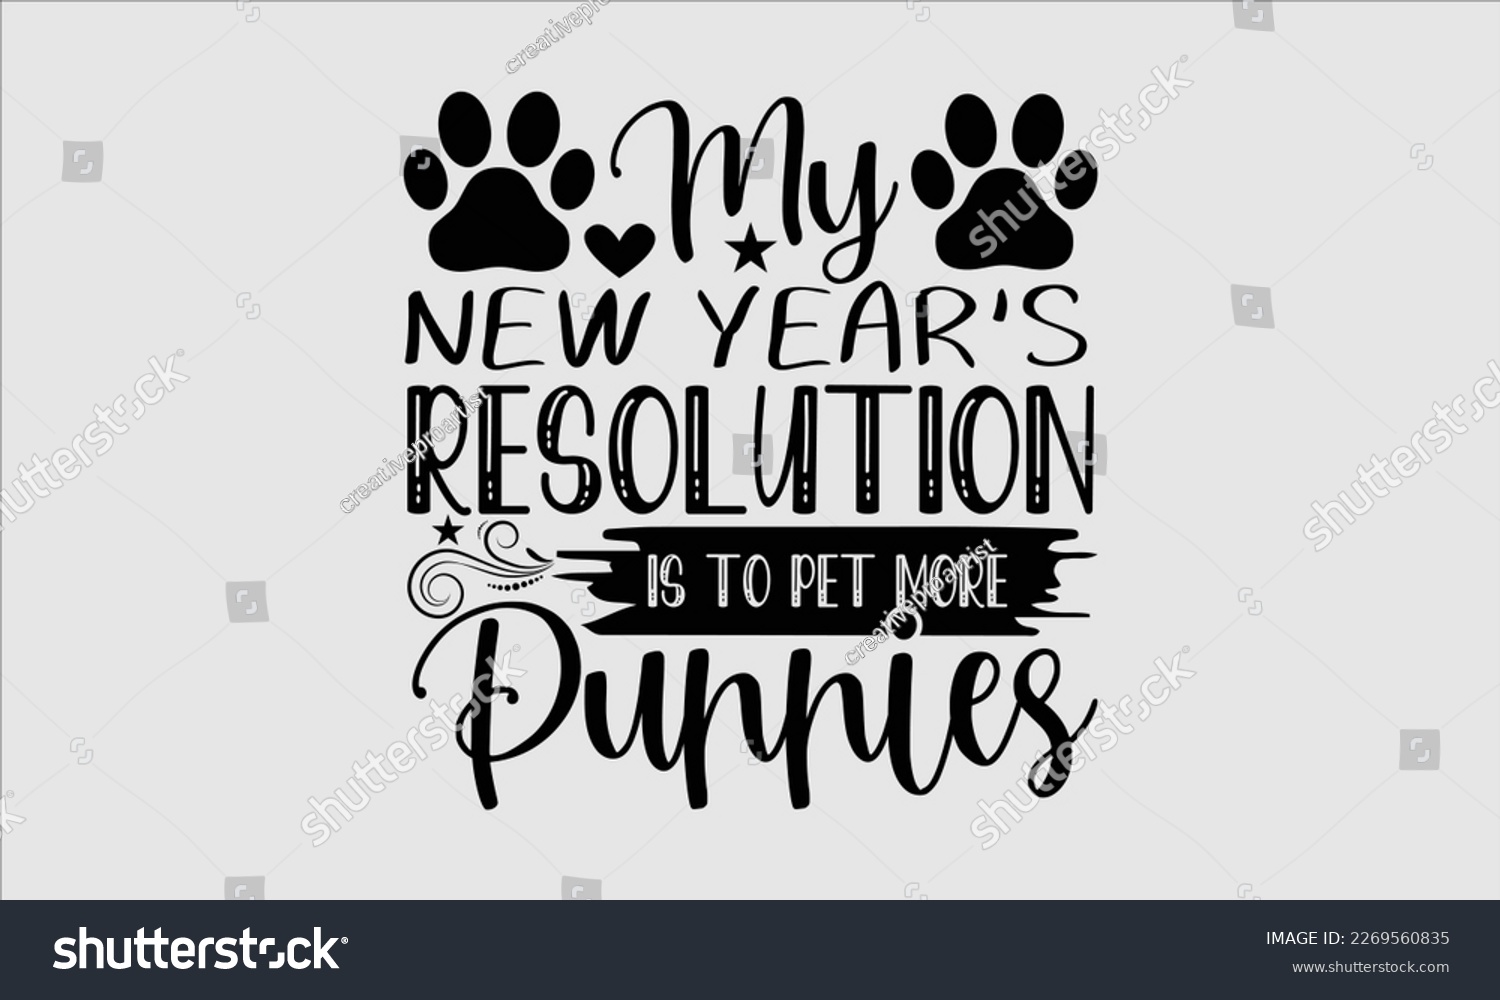 SVG of My New Year’s Resolution Is To Pet More Puppies- Happy New Year t shirt Design, lettering vector illustration isolated on white background, gift and other printing Svg and bags, posters. eps 10 svg